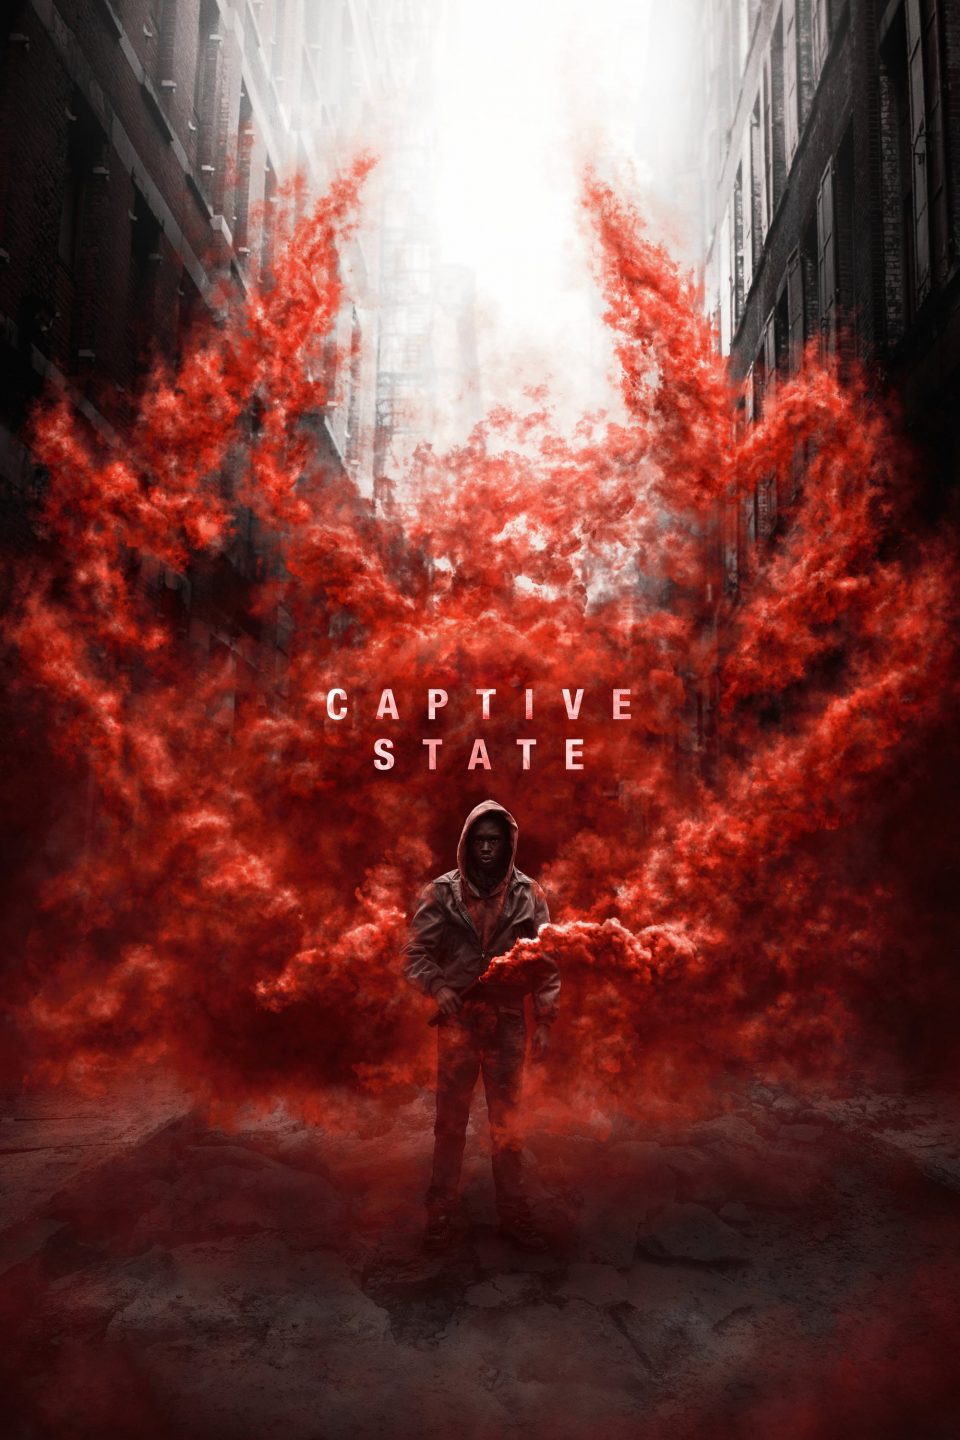 Poster for the movie "Captive State"